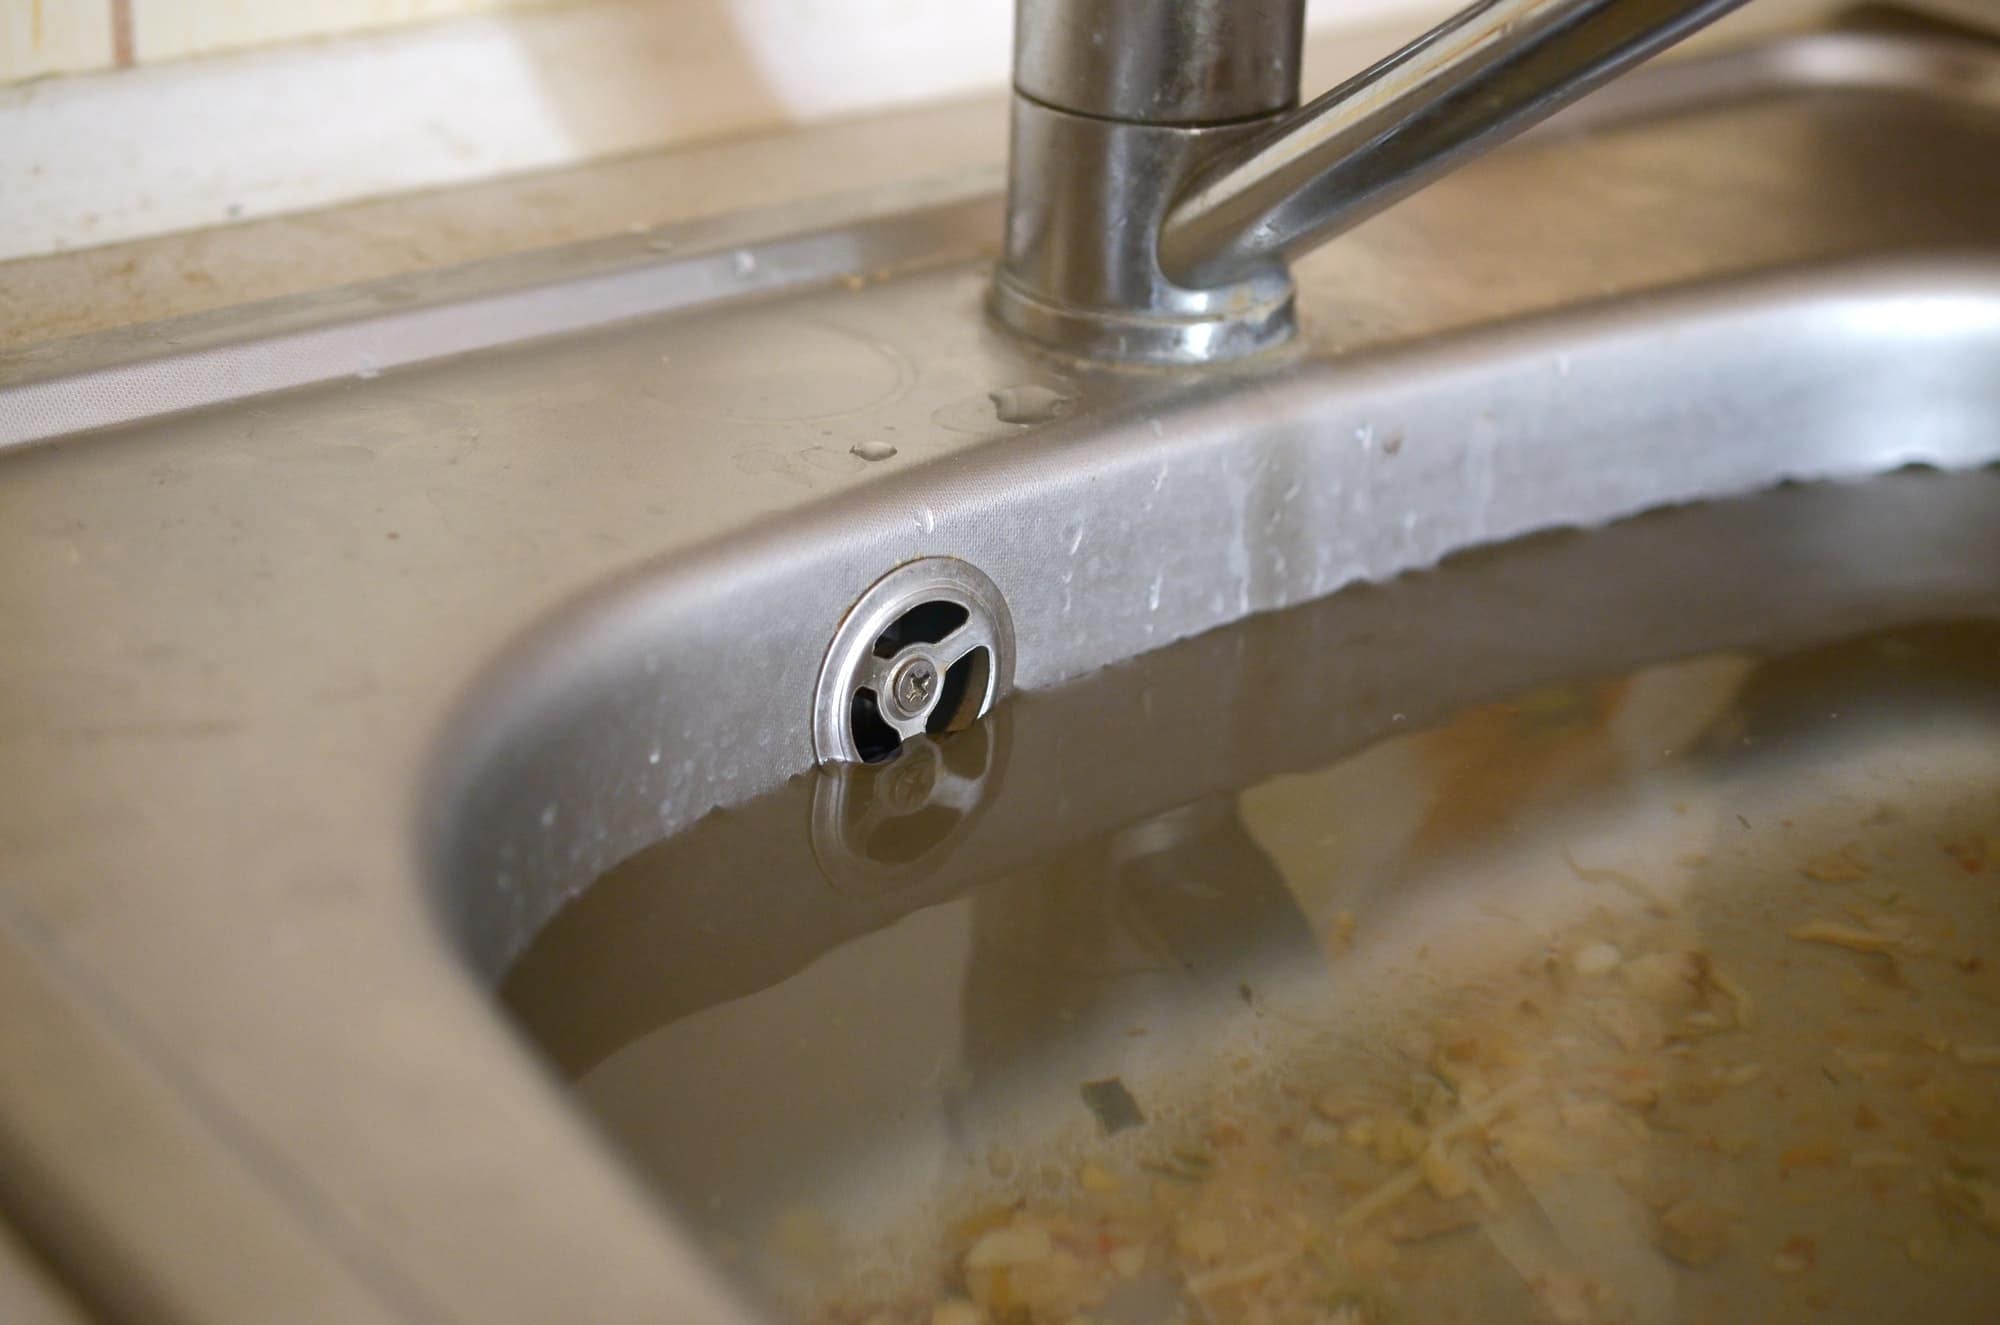 https://capitalplumbing.com.au/wp-content/uploads/2020/09/stainless-steel-sink-plug-hole-close-up-full-of-water-and-particles-of-food.jpg